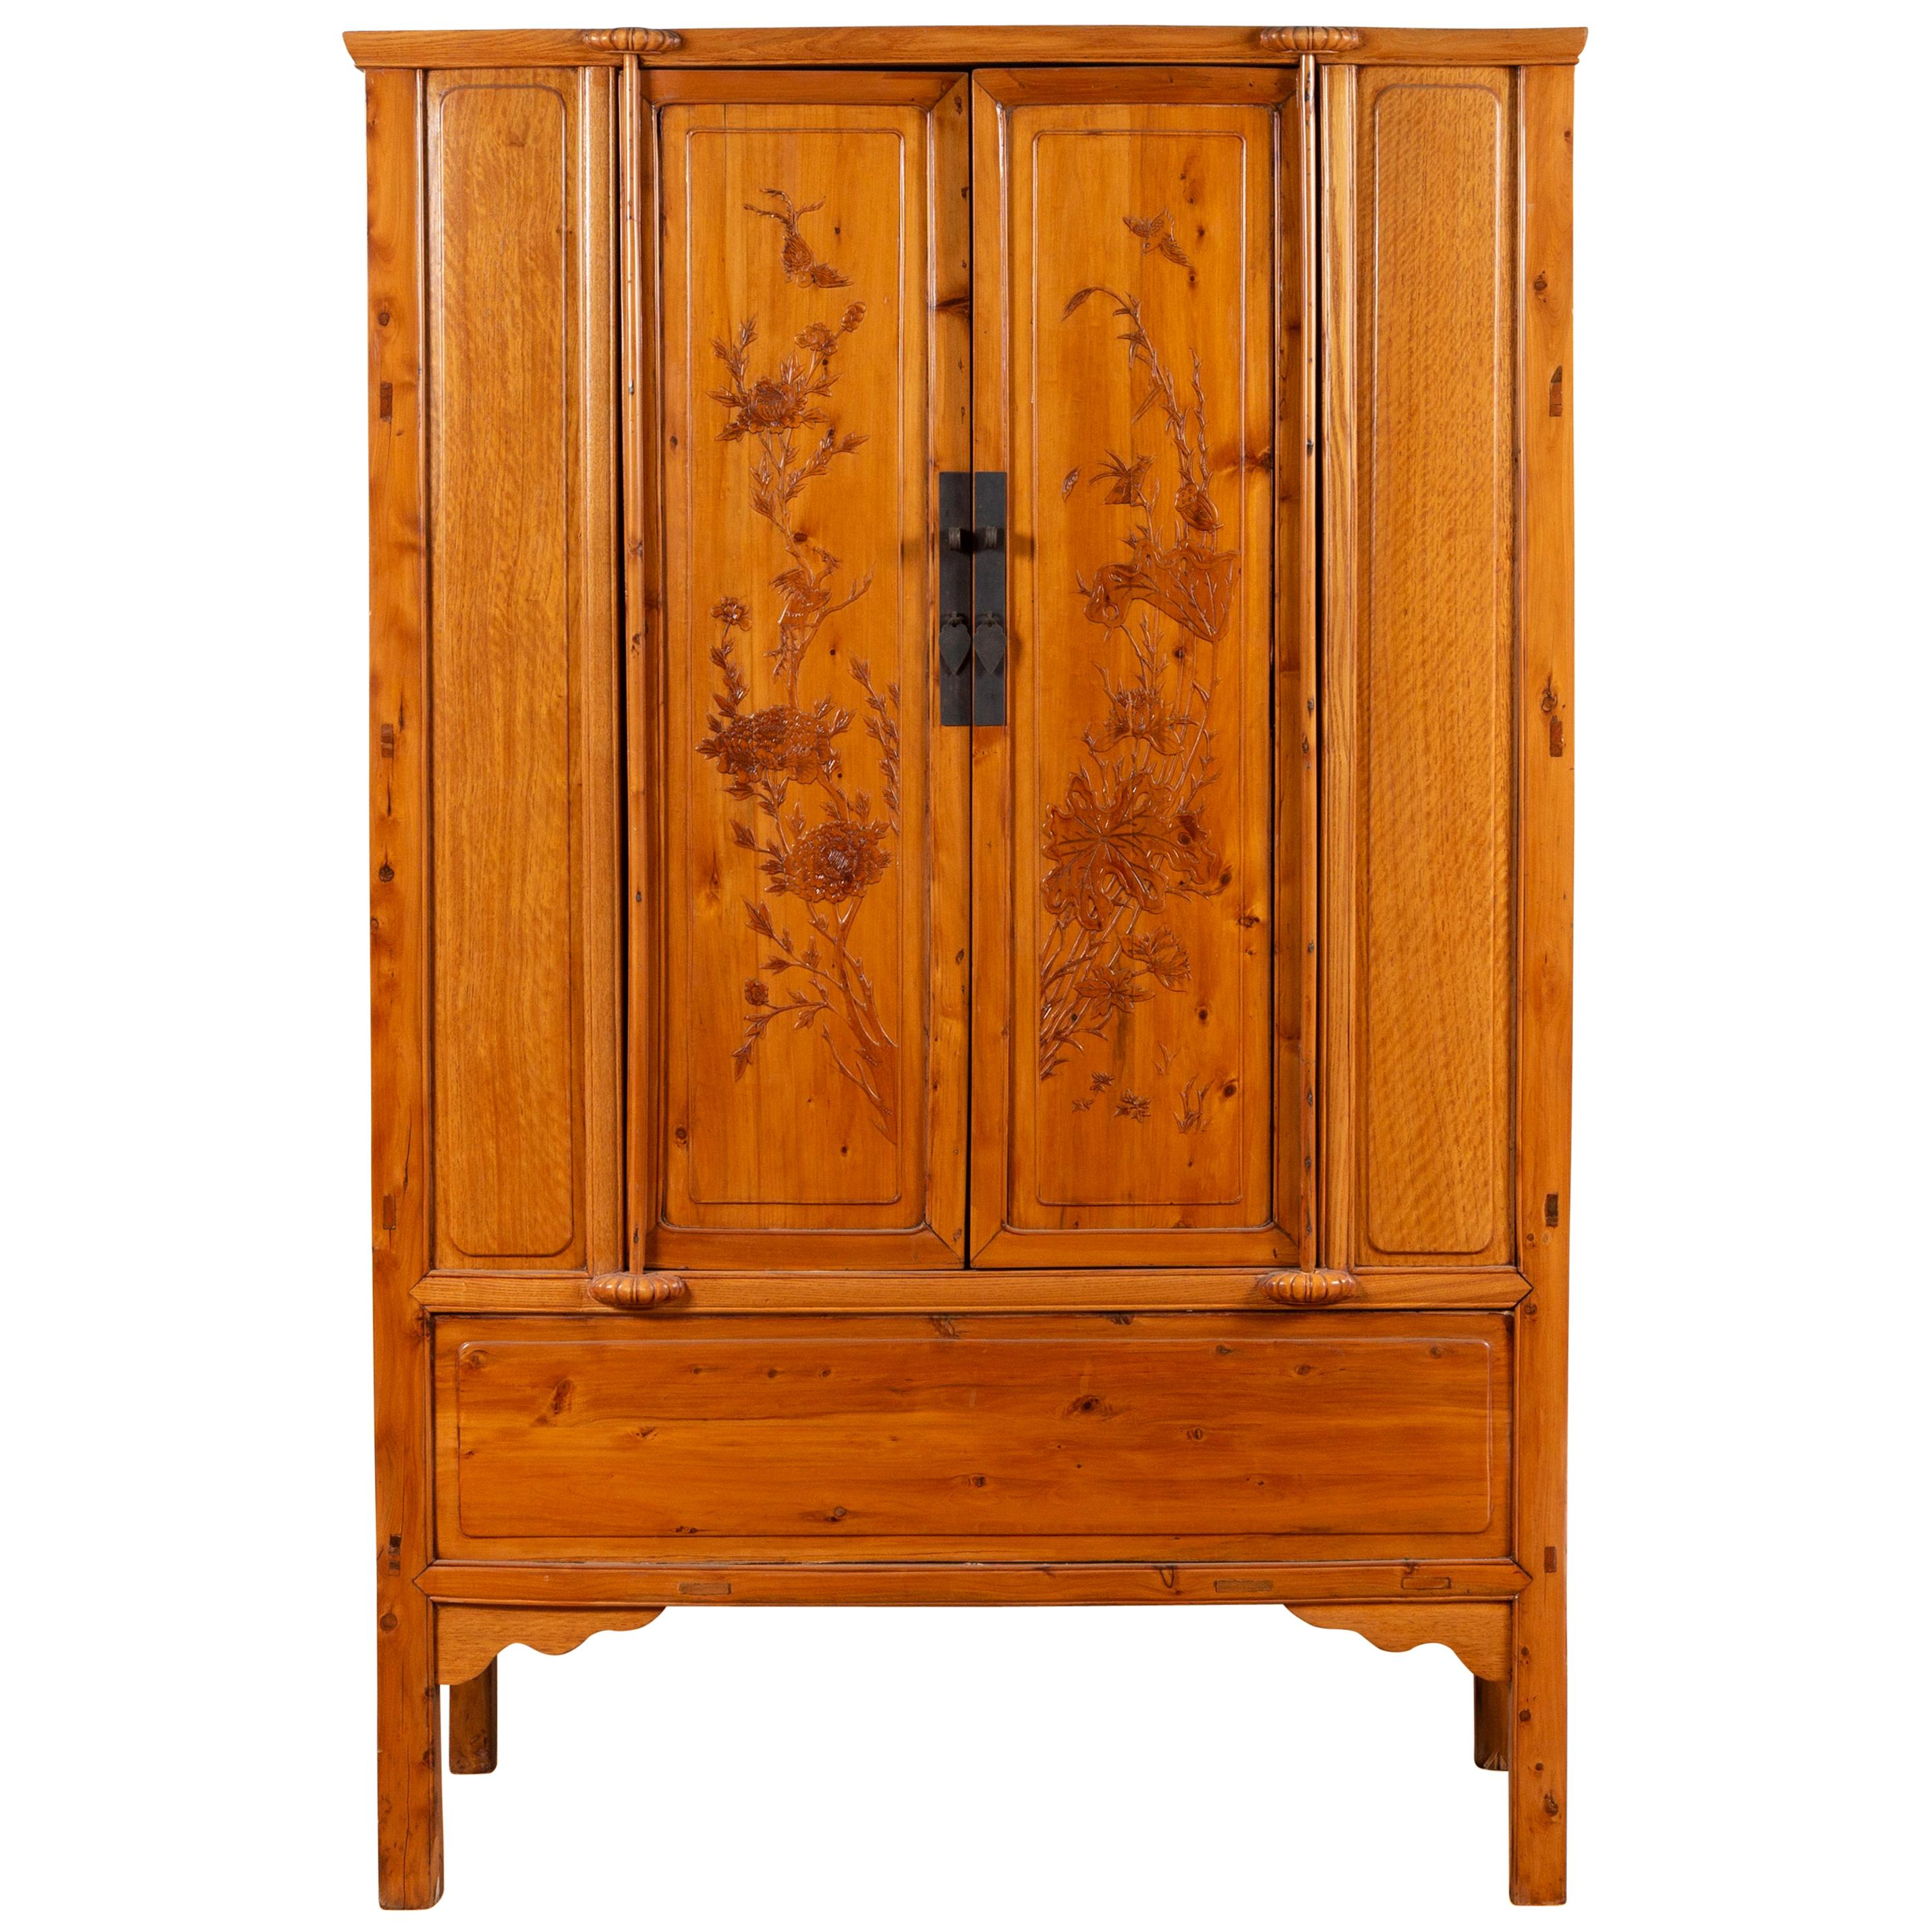 Chinese Vintage Natural Wood Two-Door Cabinet with Floral Décor and Drawers